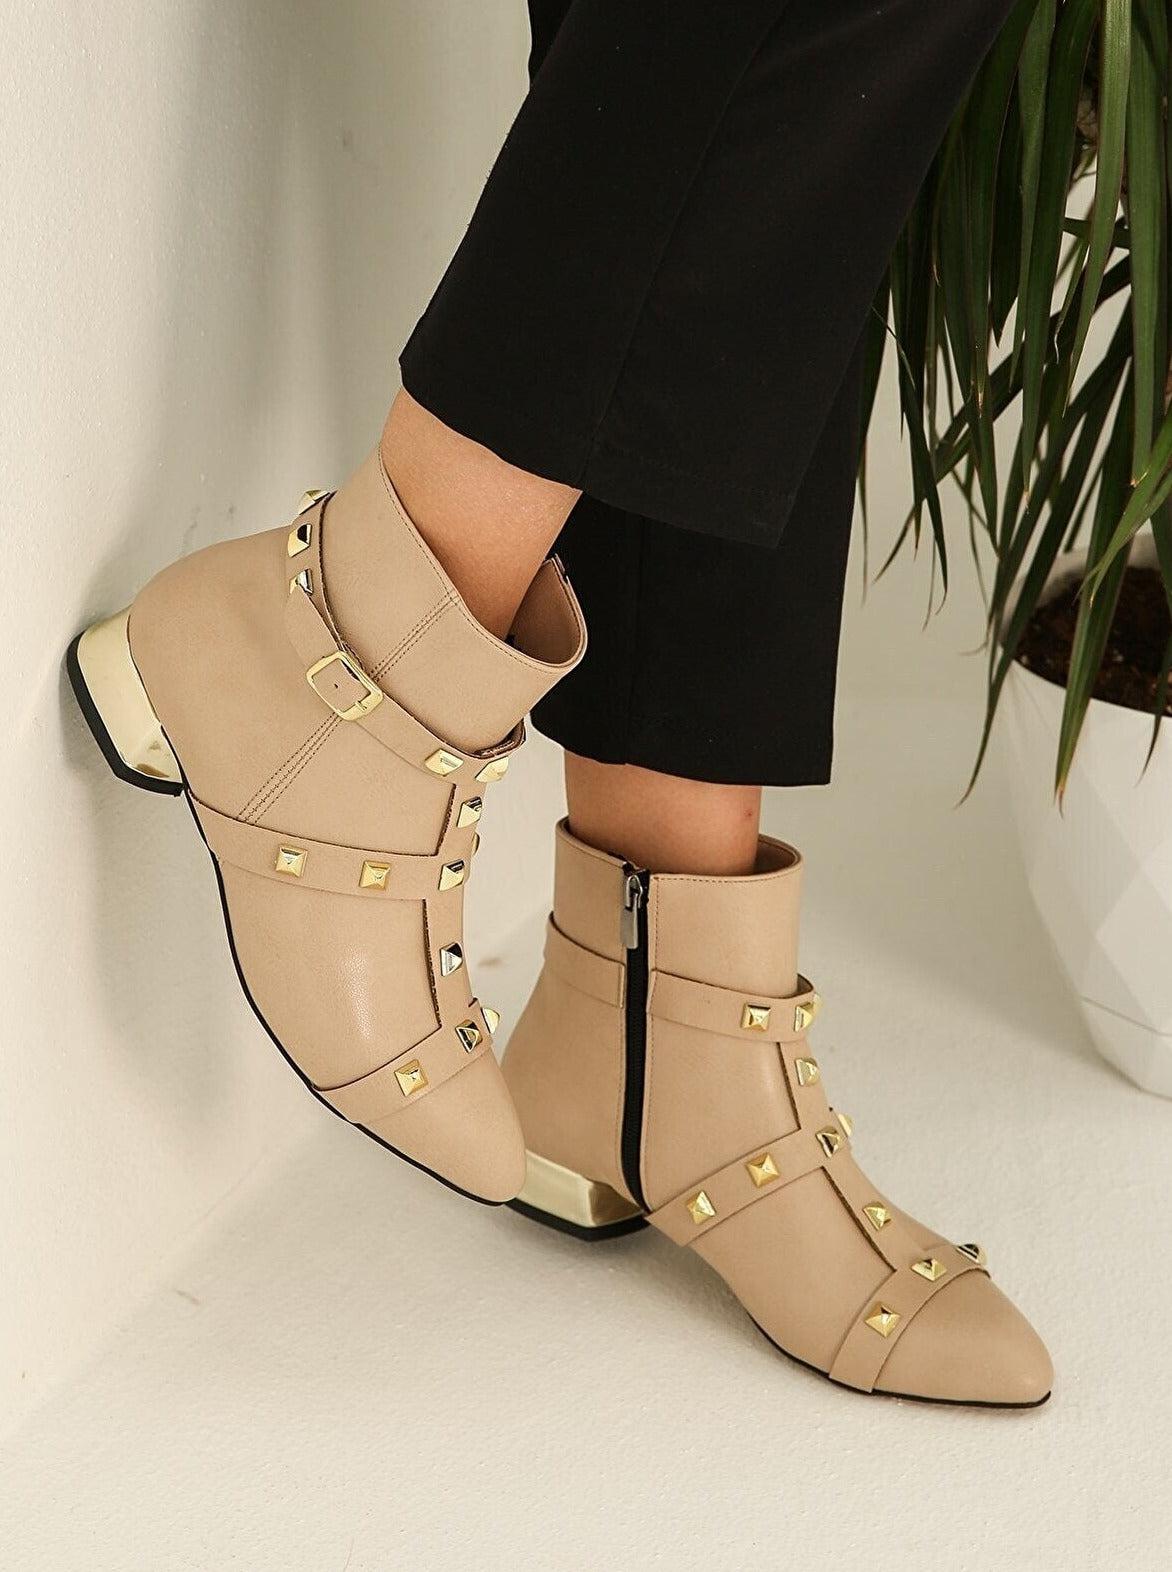 Trok Arched Heeled Boots